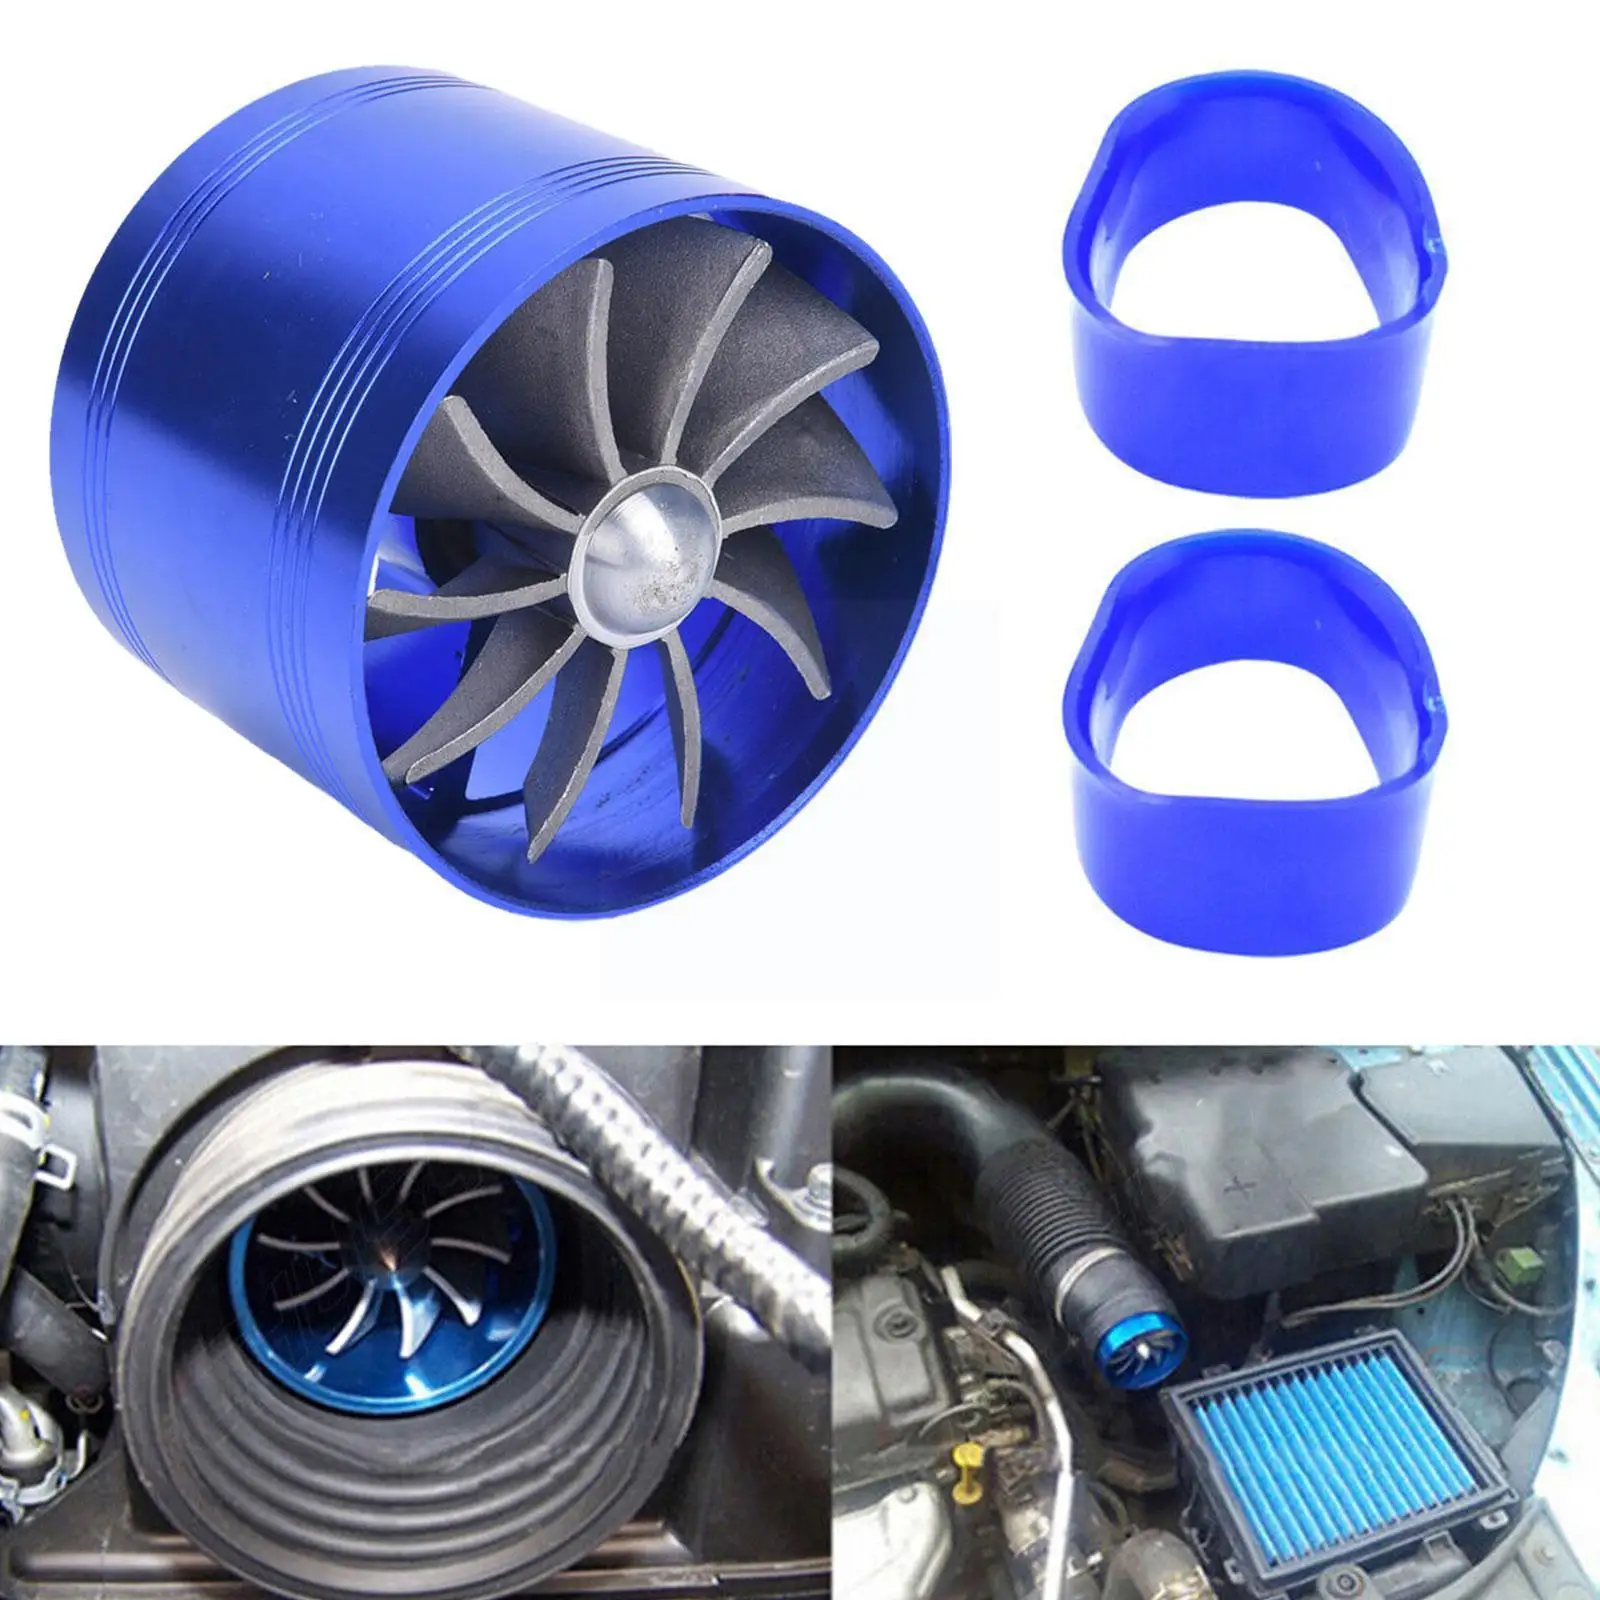 

Double Supercharger Car Turbo Air Intake Turbine Gas Fuel Saver Fan Turbine with Single Propeller 6.4 * 5cm for Air Intake X5N1